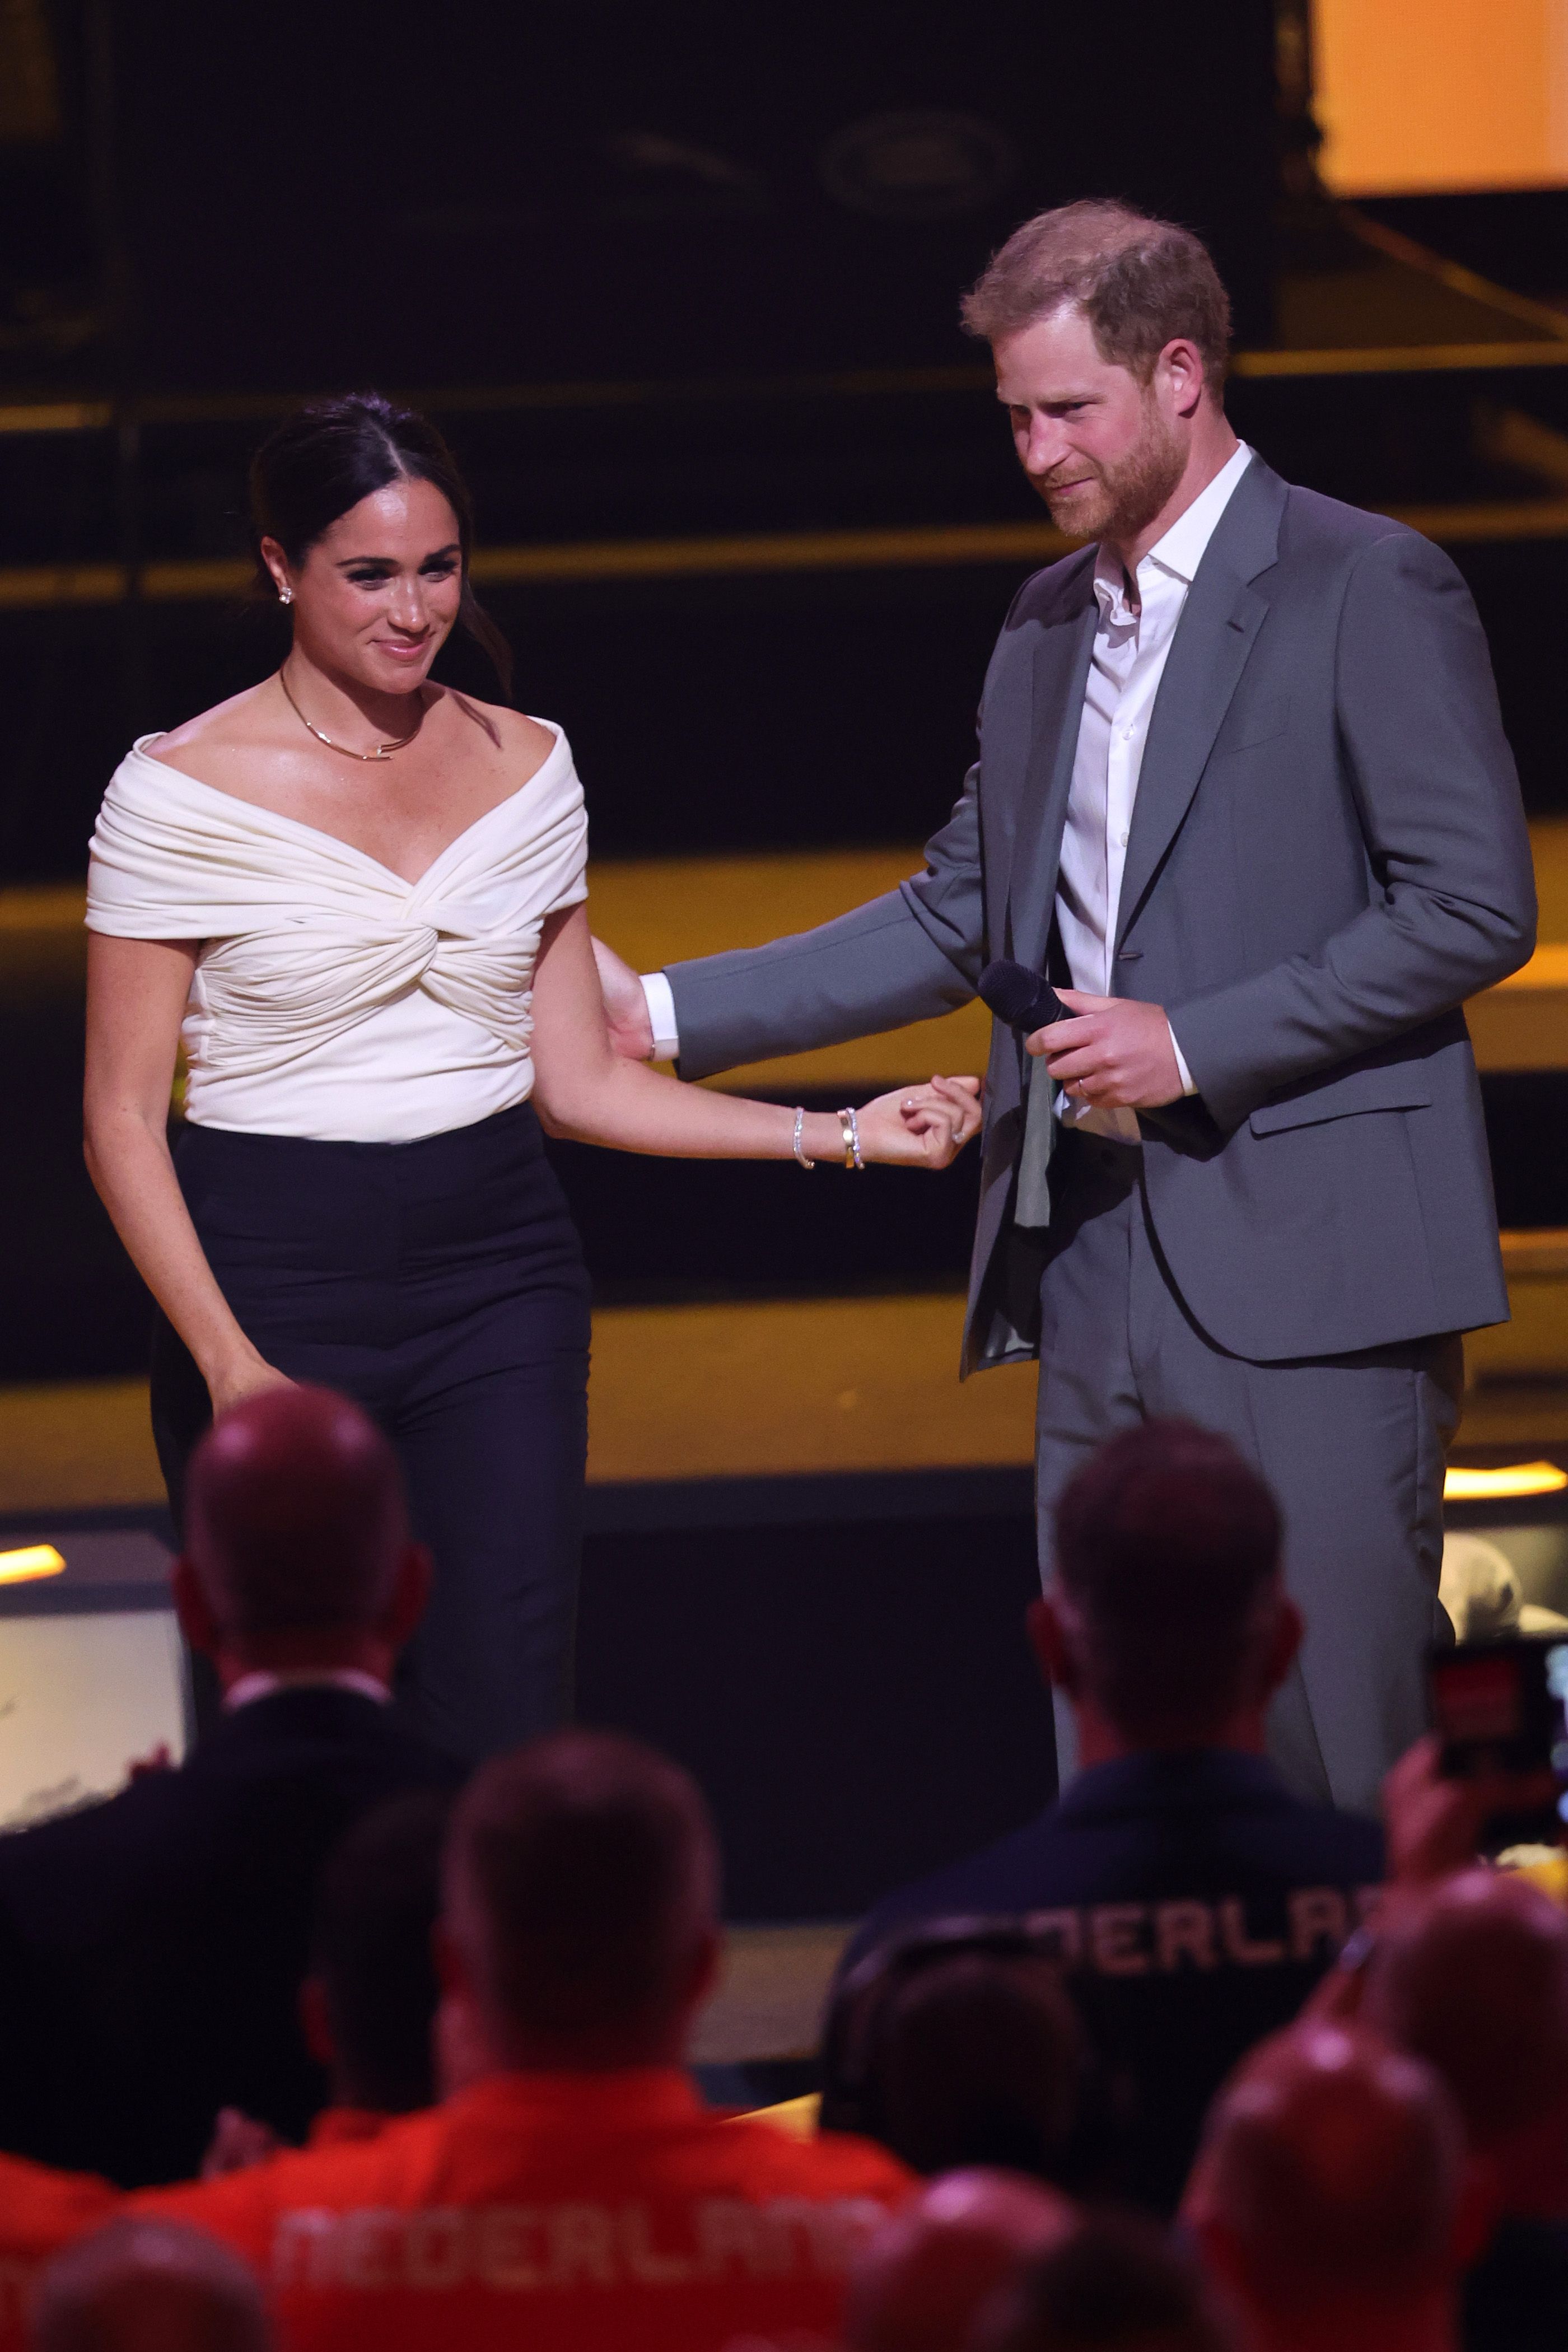  Prince Harry, Duke of Sussex and Meghan, Duchess of Sussex are seen on stage during the Invictus Games The Hague 2020 Opening Ceremony at Zuiderpark on April 16, 2022 in The Hague, Netherlands | Source: Getty Images